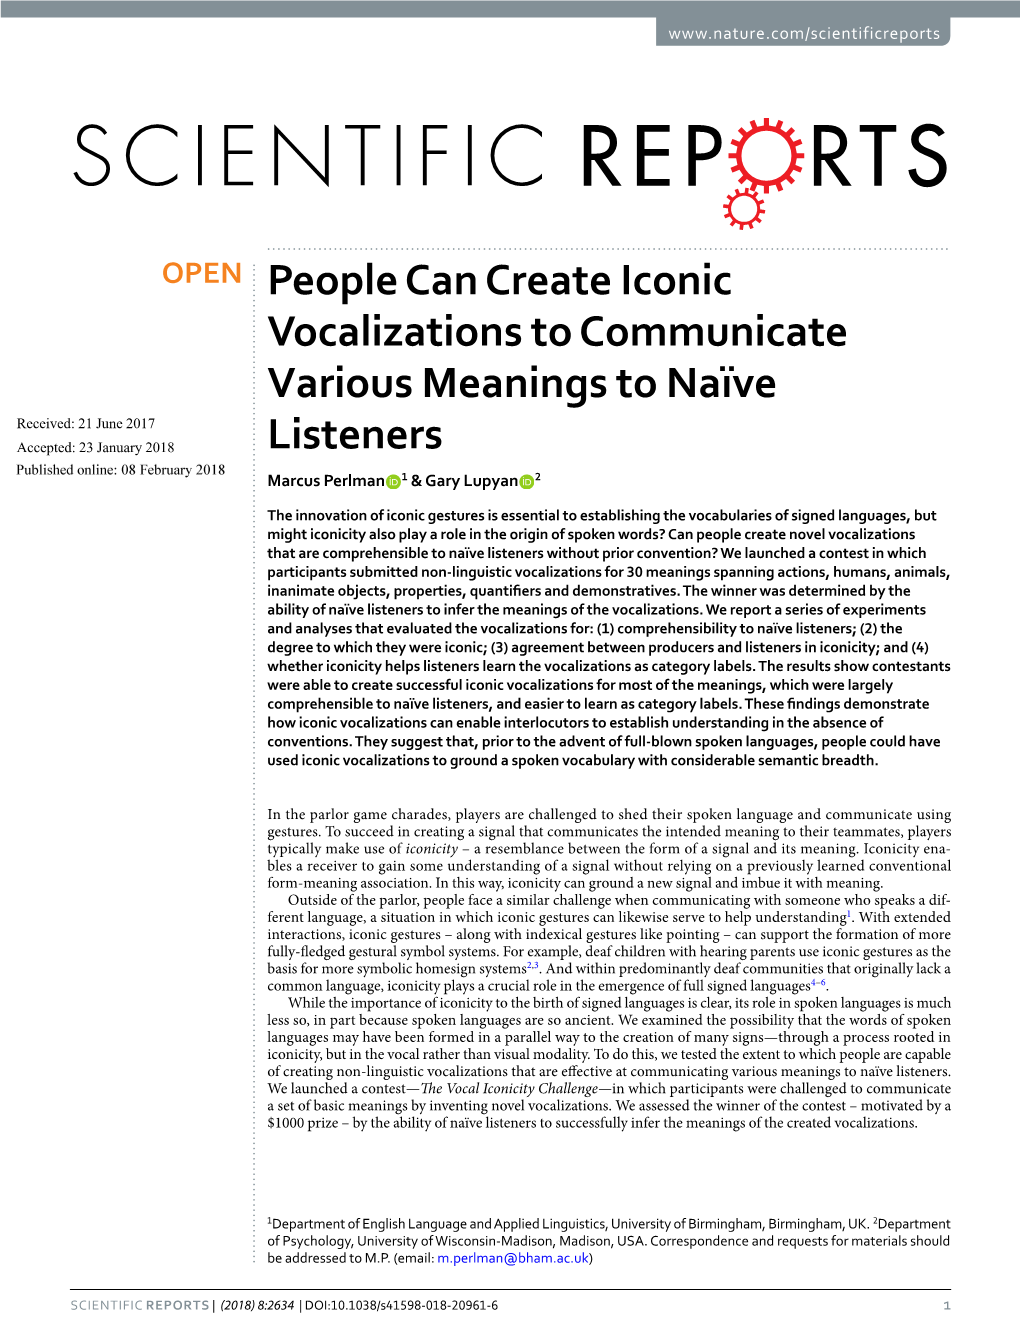 People Can Create Iconic Vocalizations to Communicate